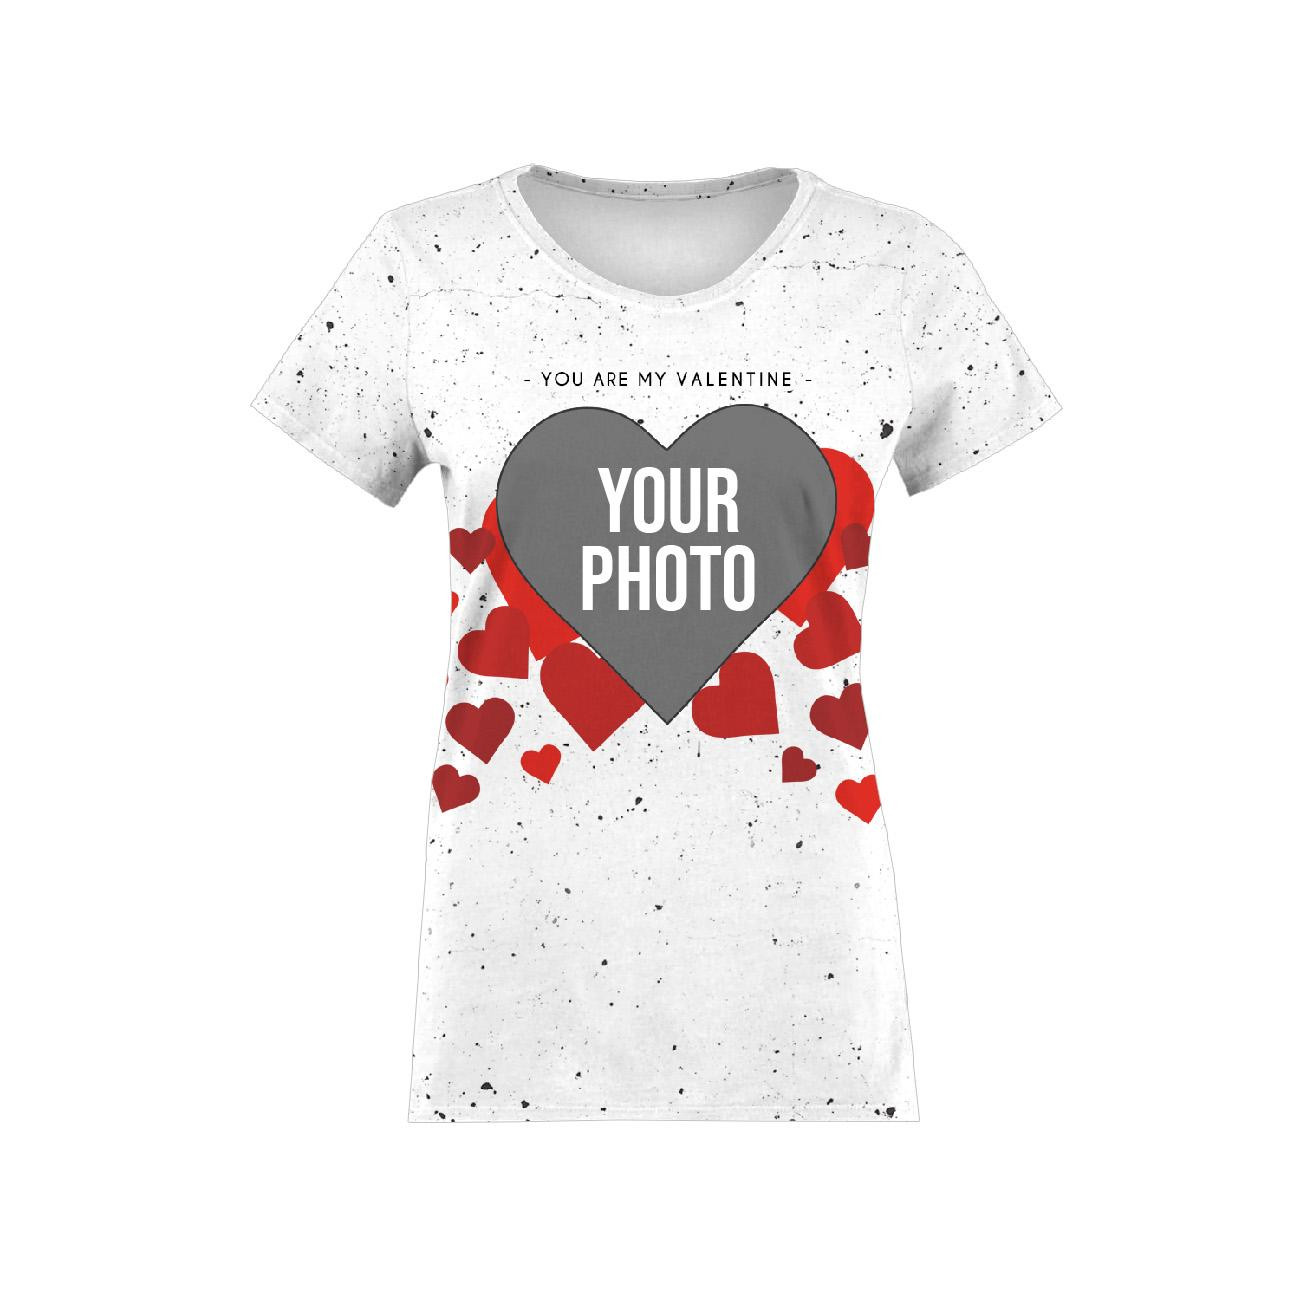 WOMEN'S T-SHIRT - YOU ARE MY VALENTINE - WITH YOUR OWN PHOTO - sewing set